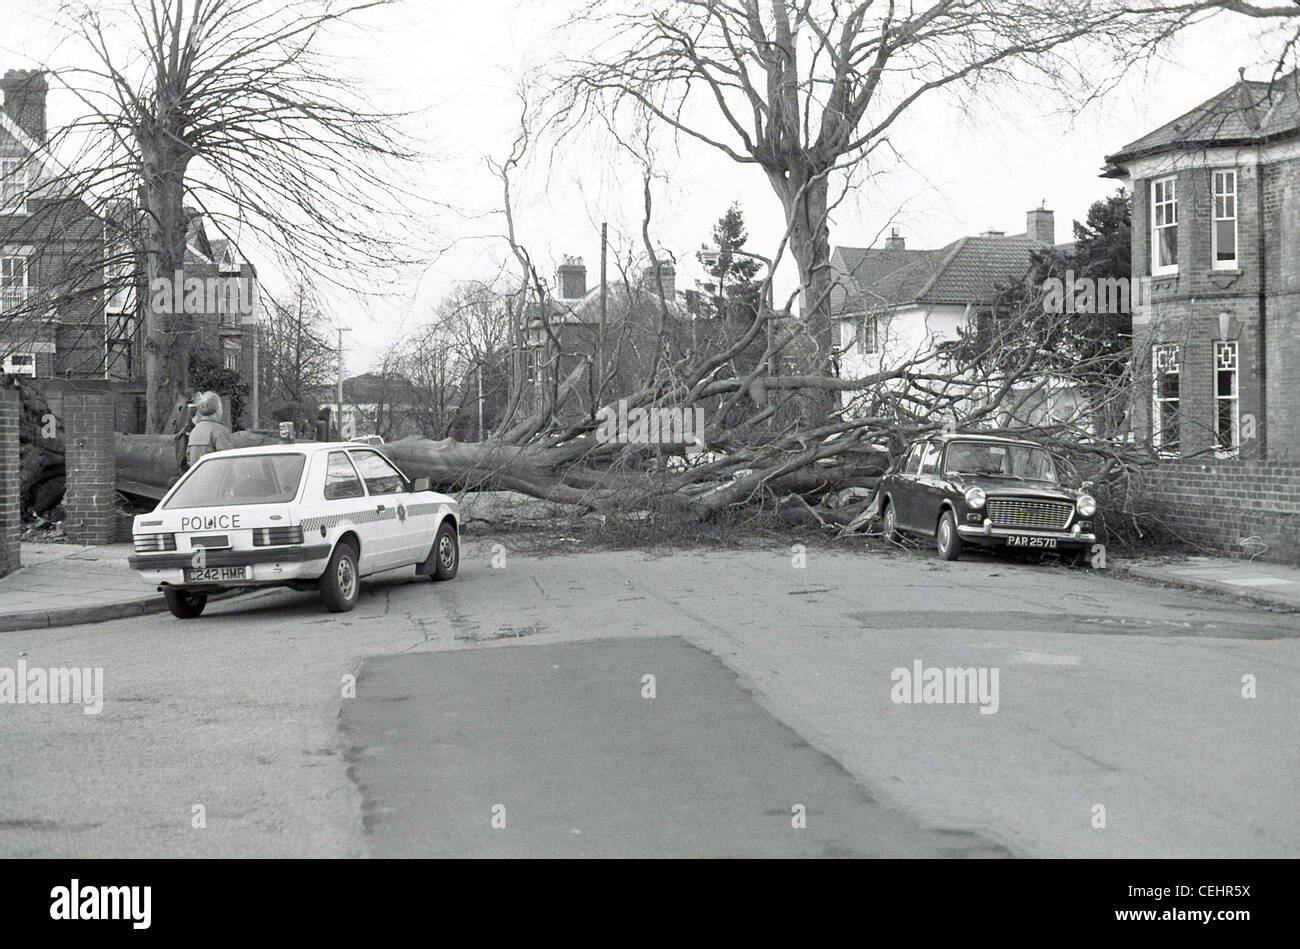 A large tree blocks Manor Road in Salisbury following  a Storm in 1985. A police Ford Escort is parked opposite an Austin 1100 Stock Photo